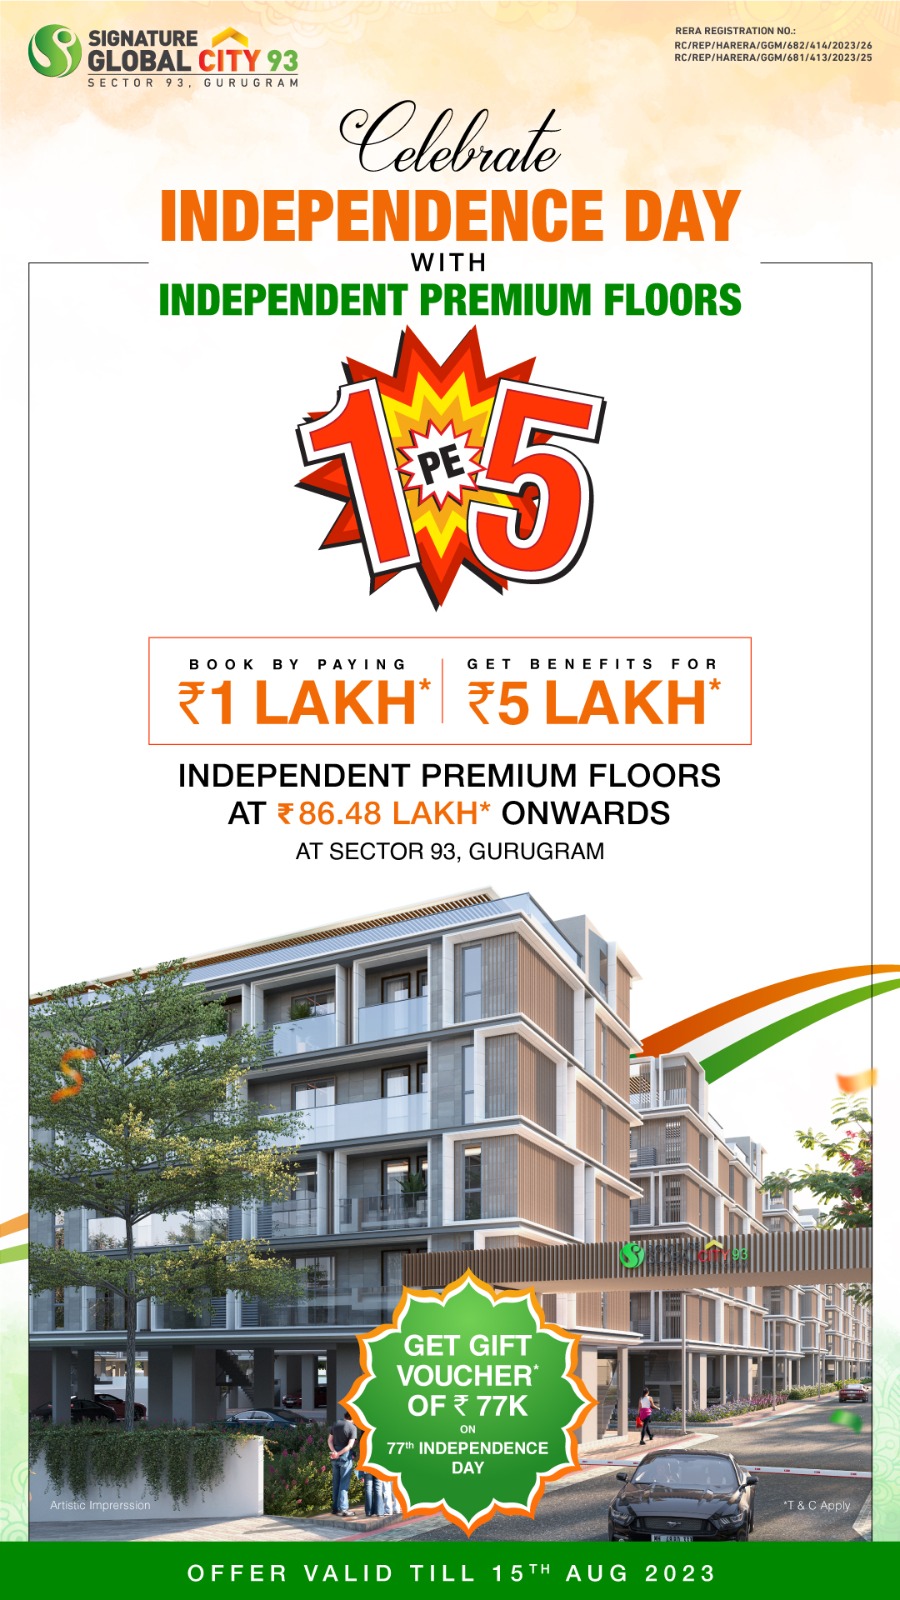 Celebrate Independence Day with Independent premium floors at Signature Global City 93, Gurgaon Update